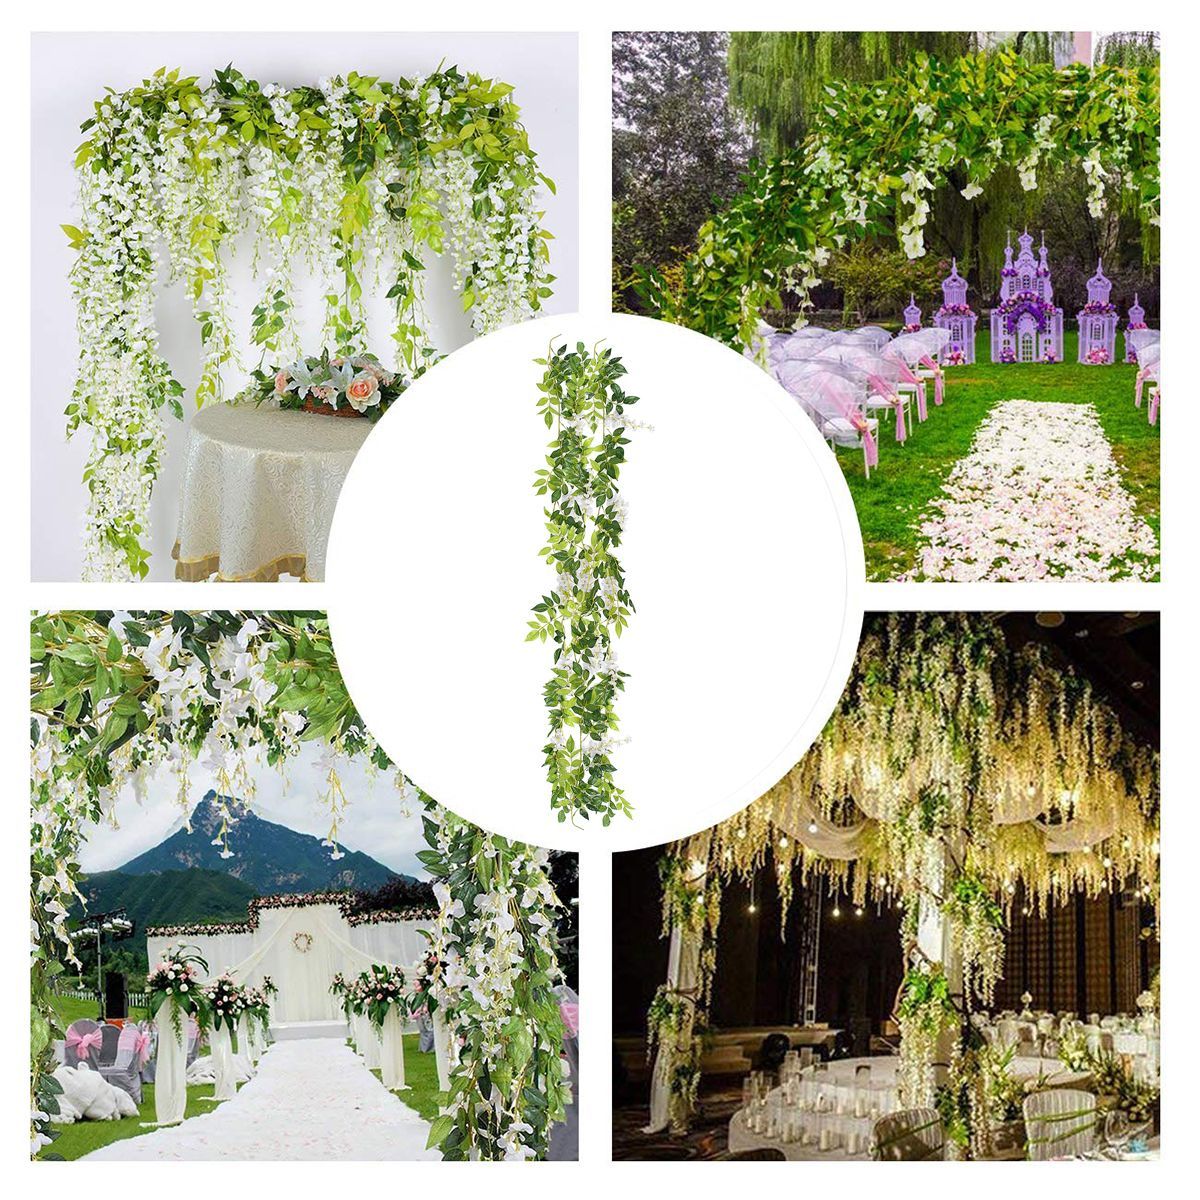 Wisteria-Garland-Artificial-Flowers-Bunch-Wedding-Home-Hanging-Ivy-Decorations-2m-1496339